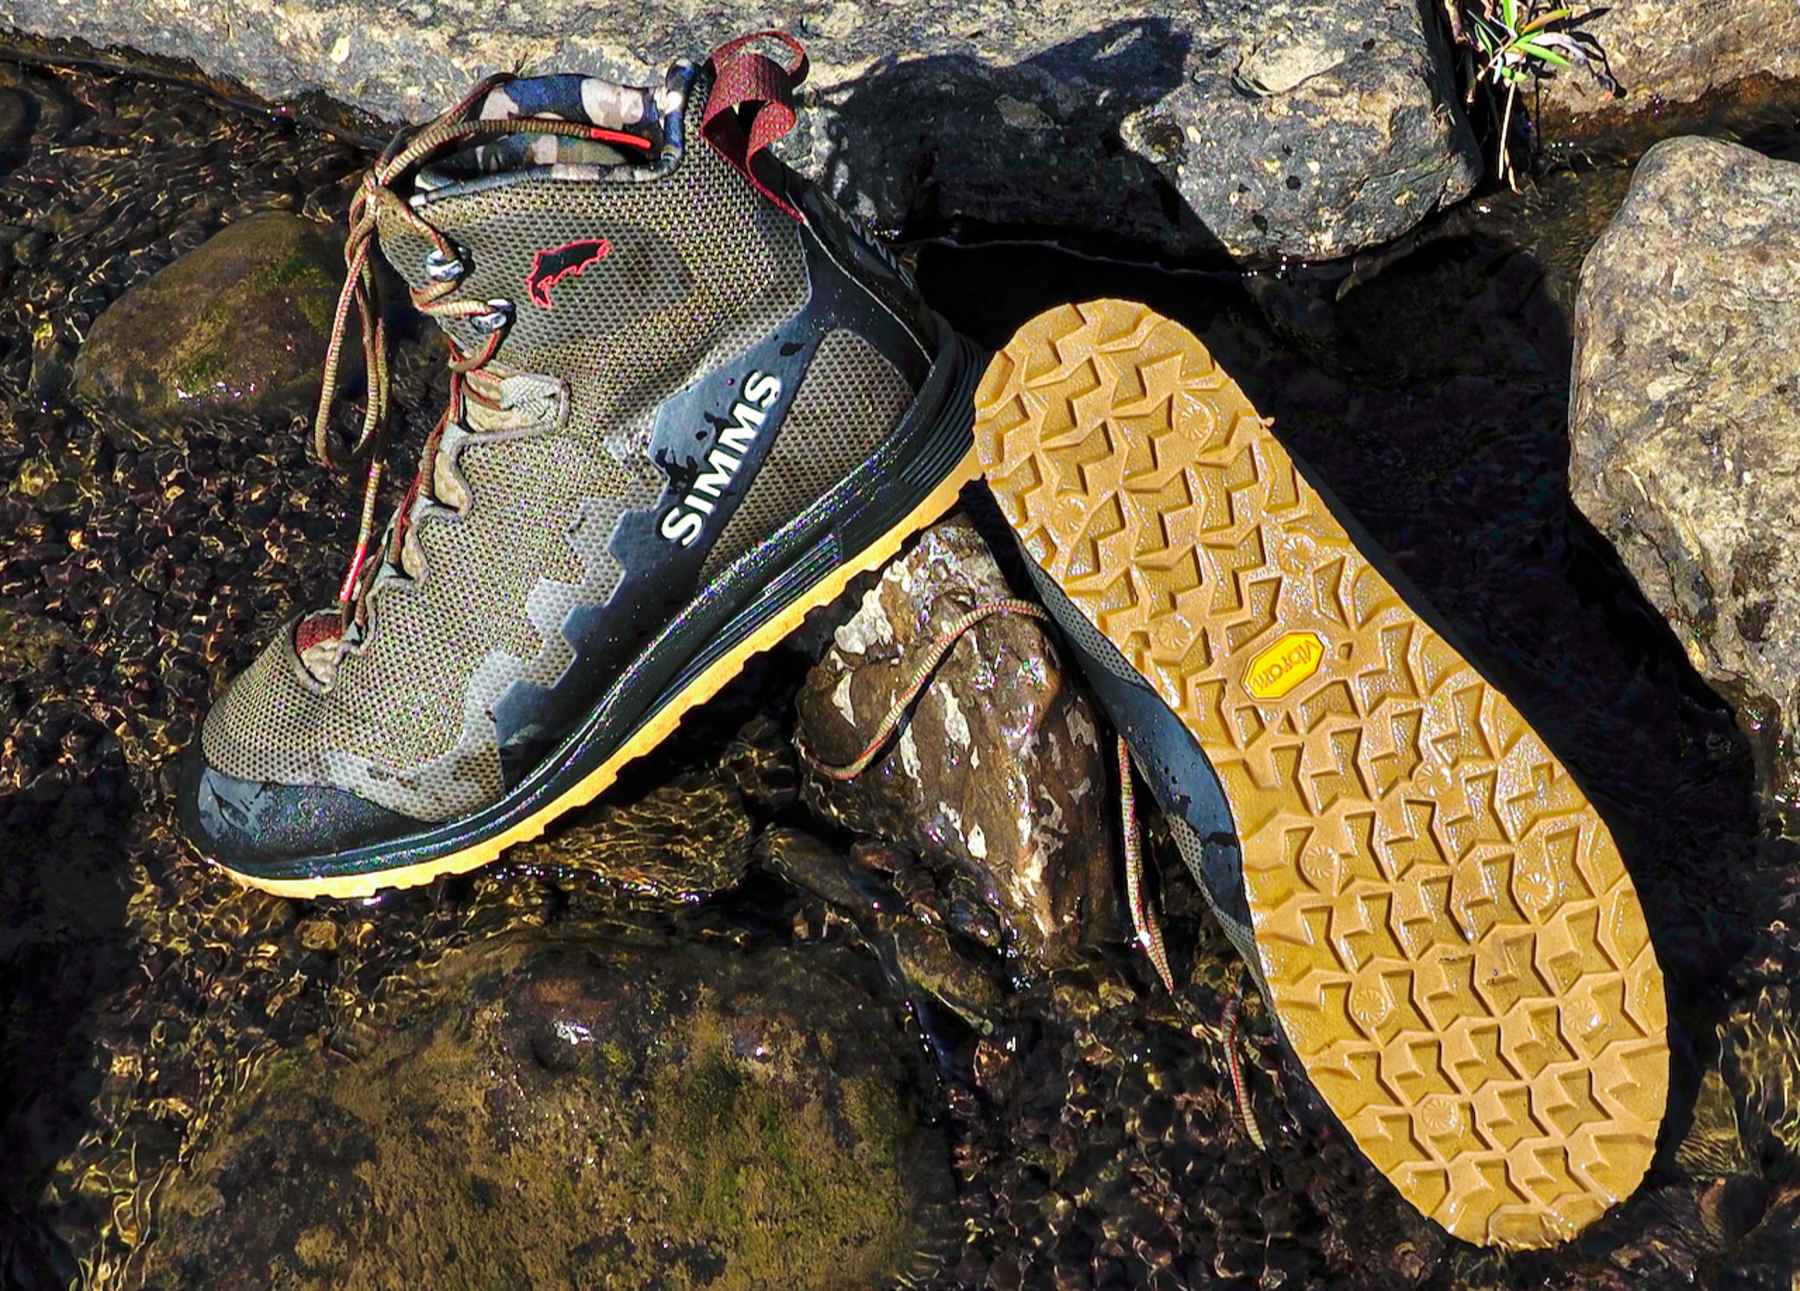 Simms Flyweight Wading Shoes, Felt Soles